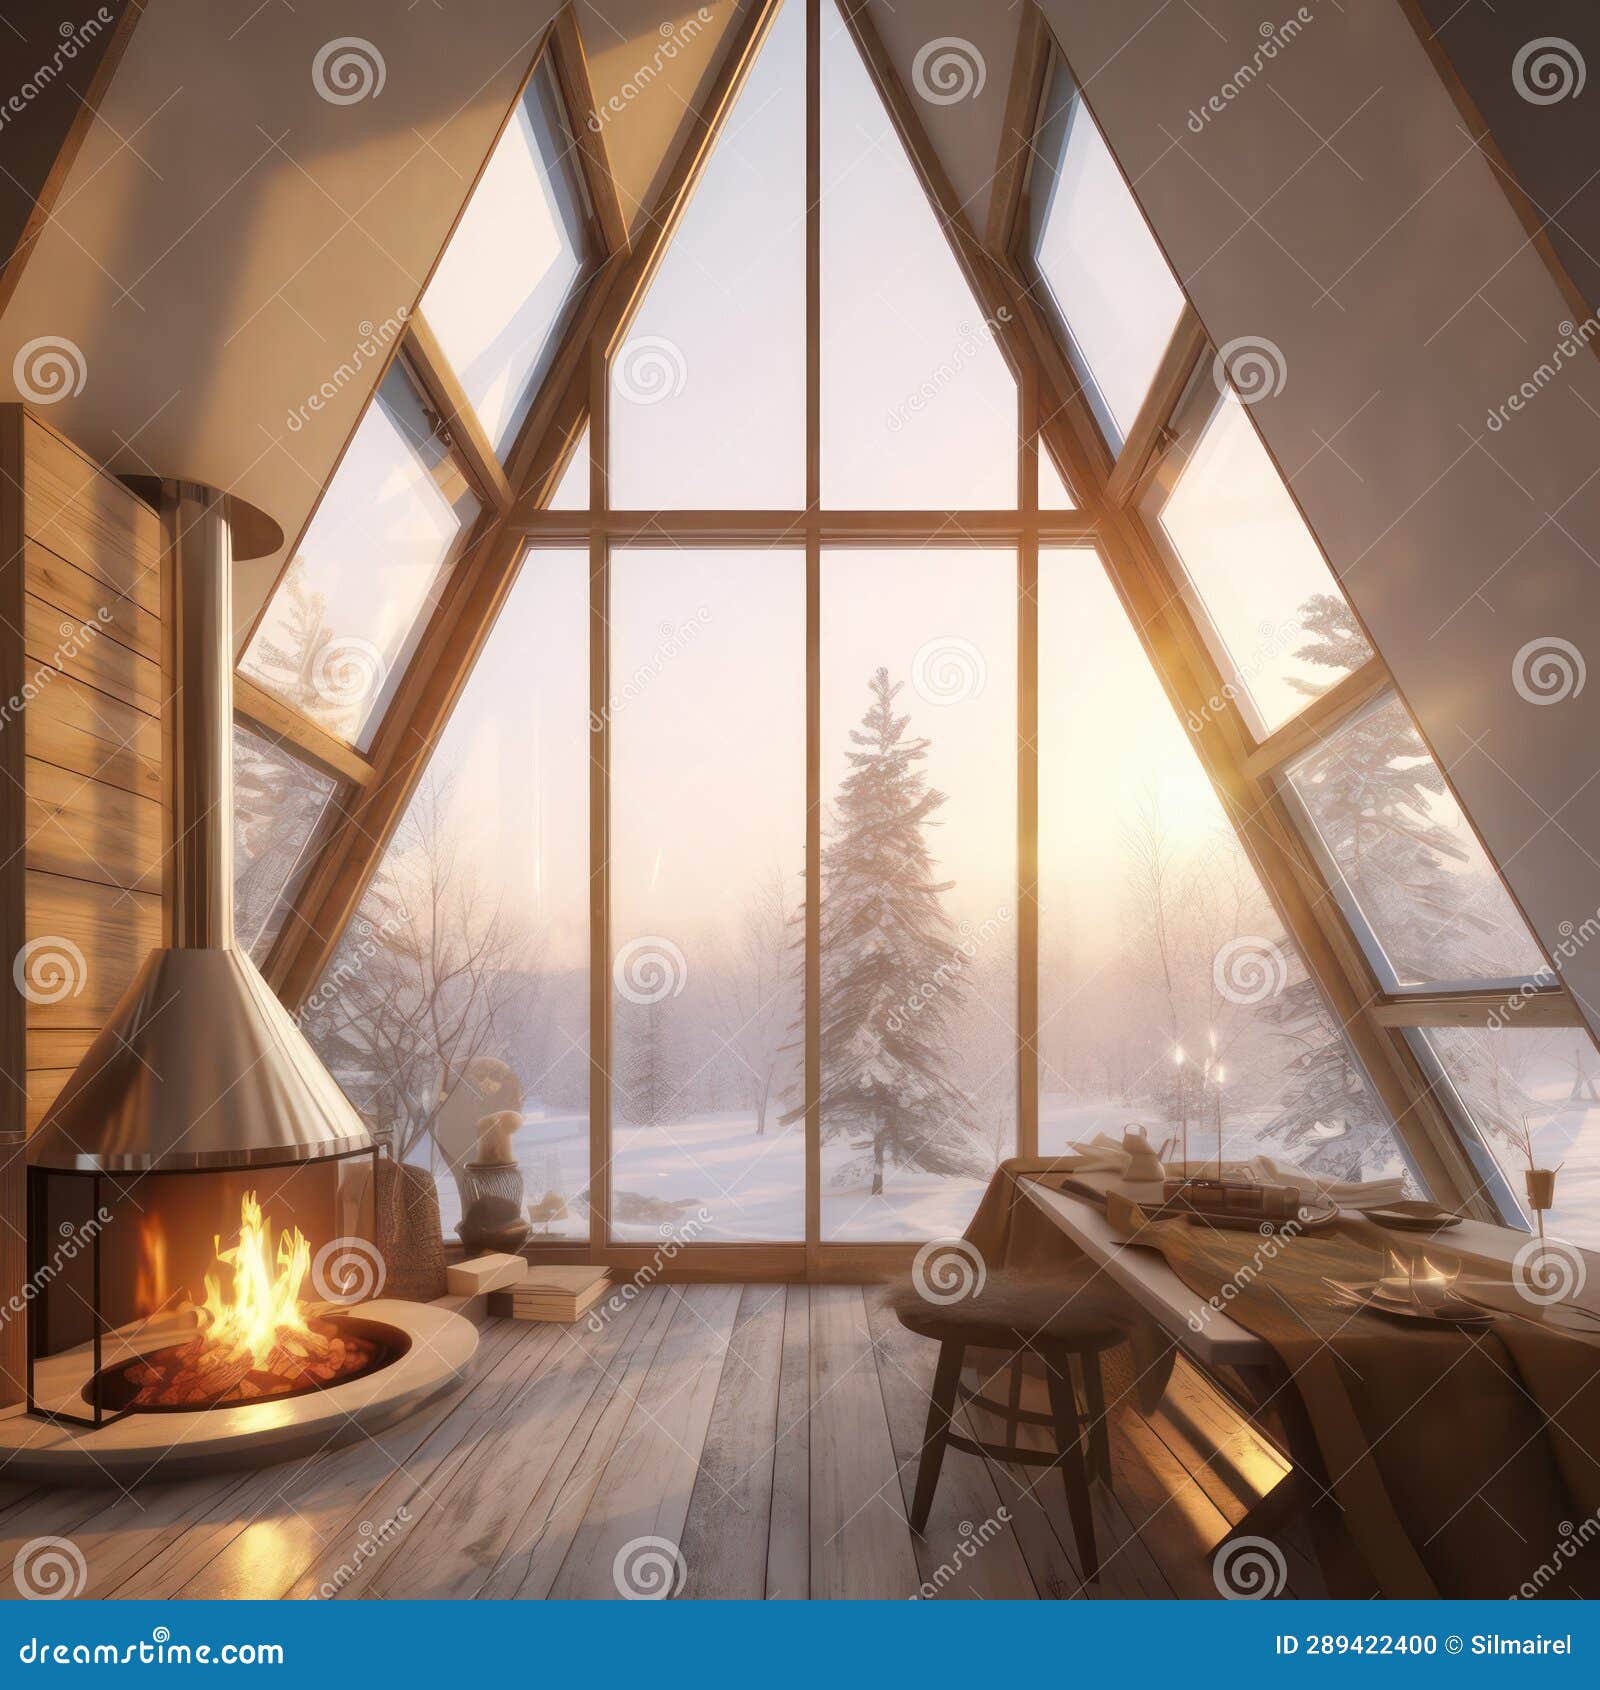 photo of the beautiful, stylish, lightful and cosy indoor interior of triangular house glamping resort in winter snow forest